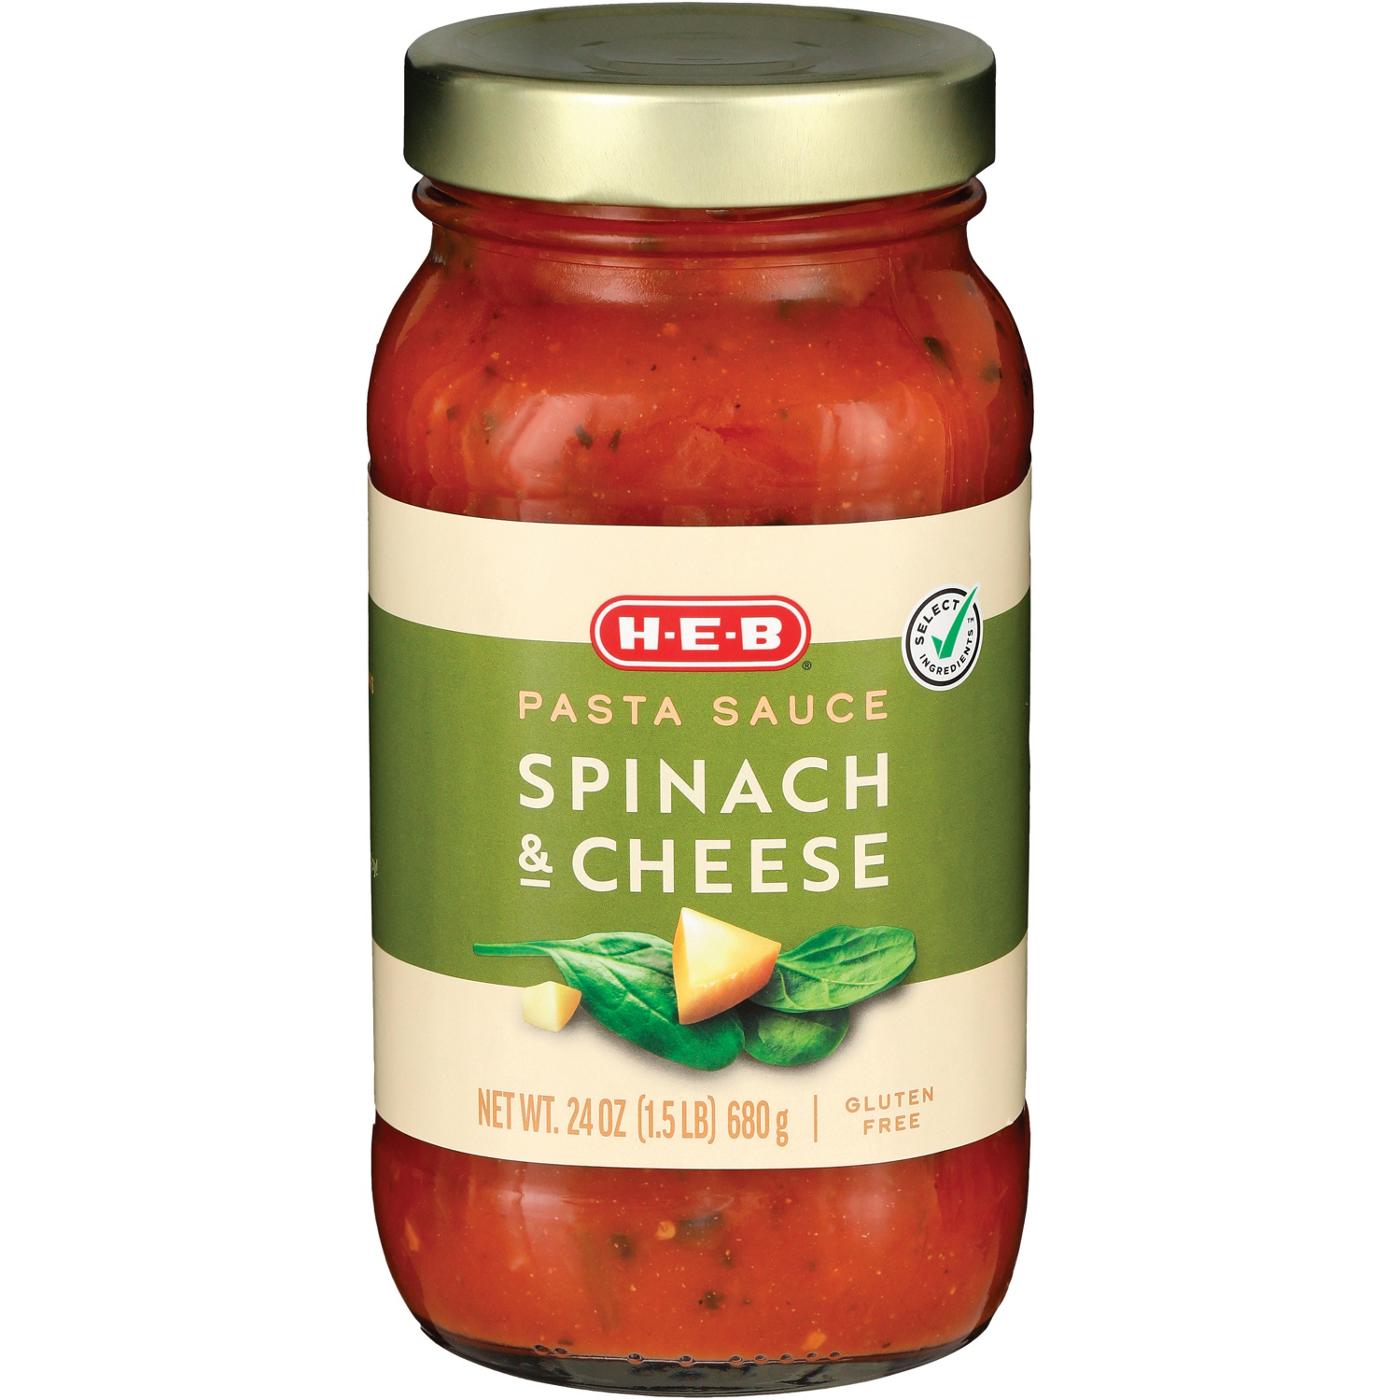 H-E-B Spinach & Cheese Pasta Sauce; image 2 of 2